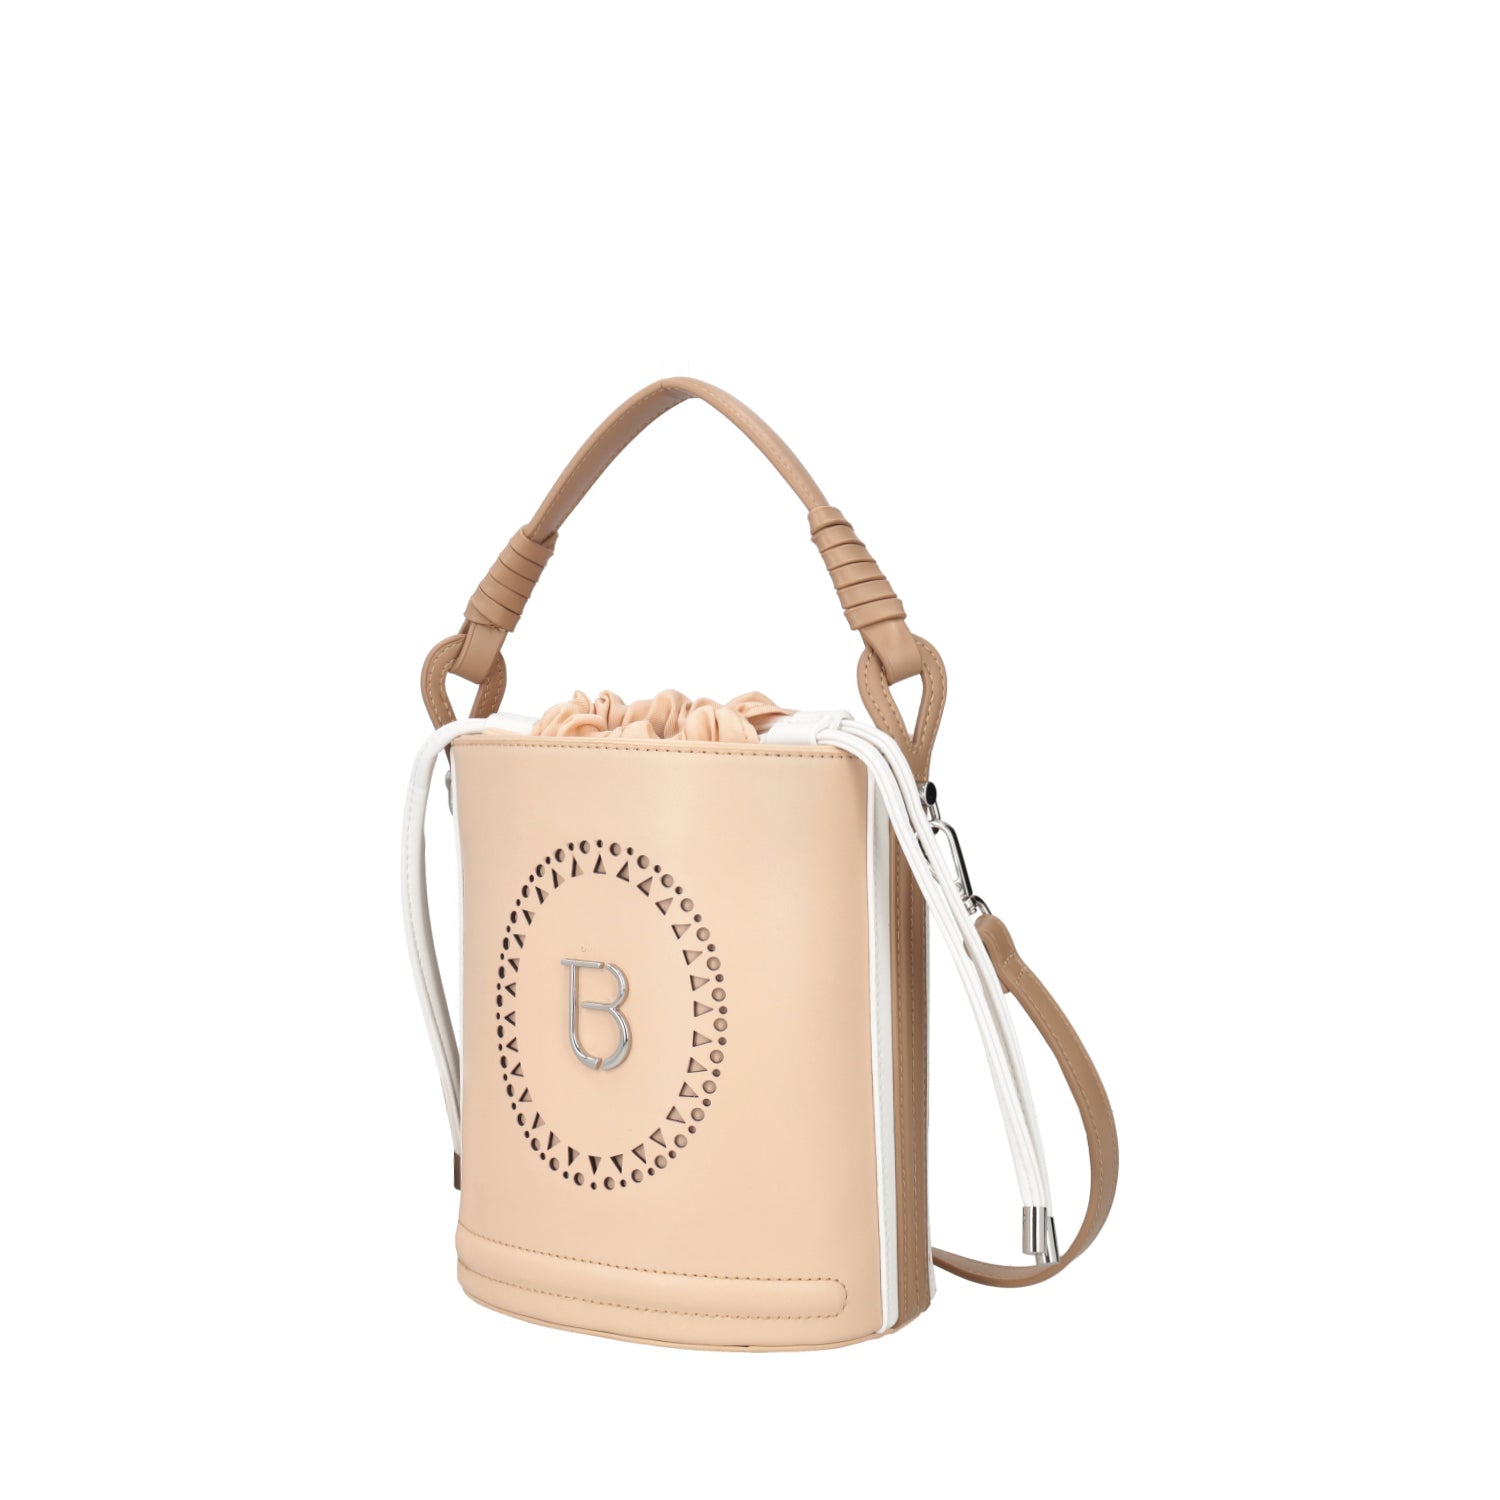 NATURAL ORTENSIA BUCKET WITH SHOULDER STRAP